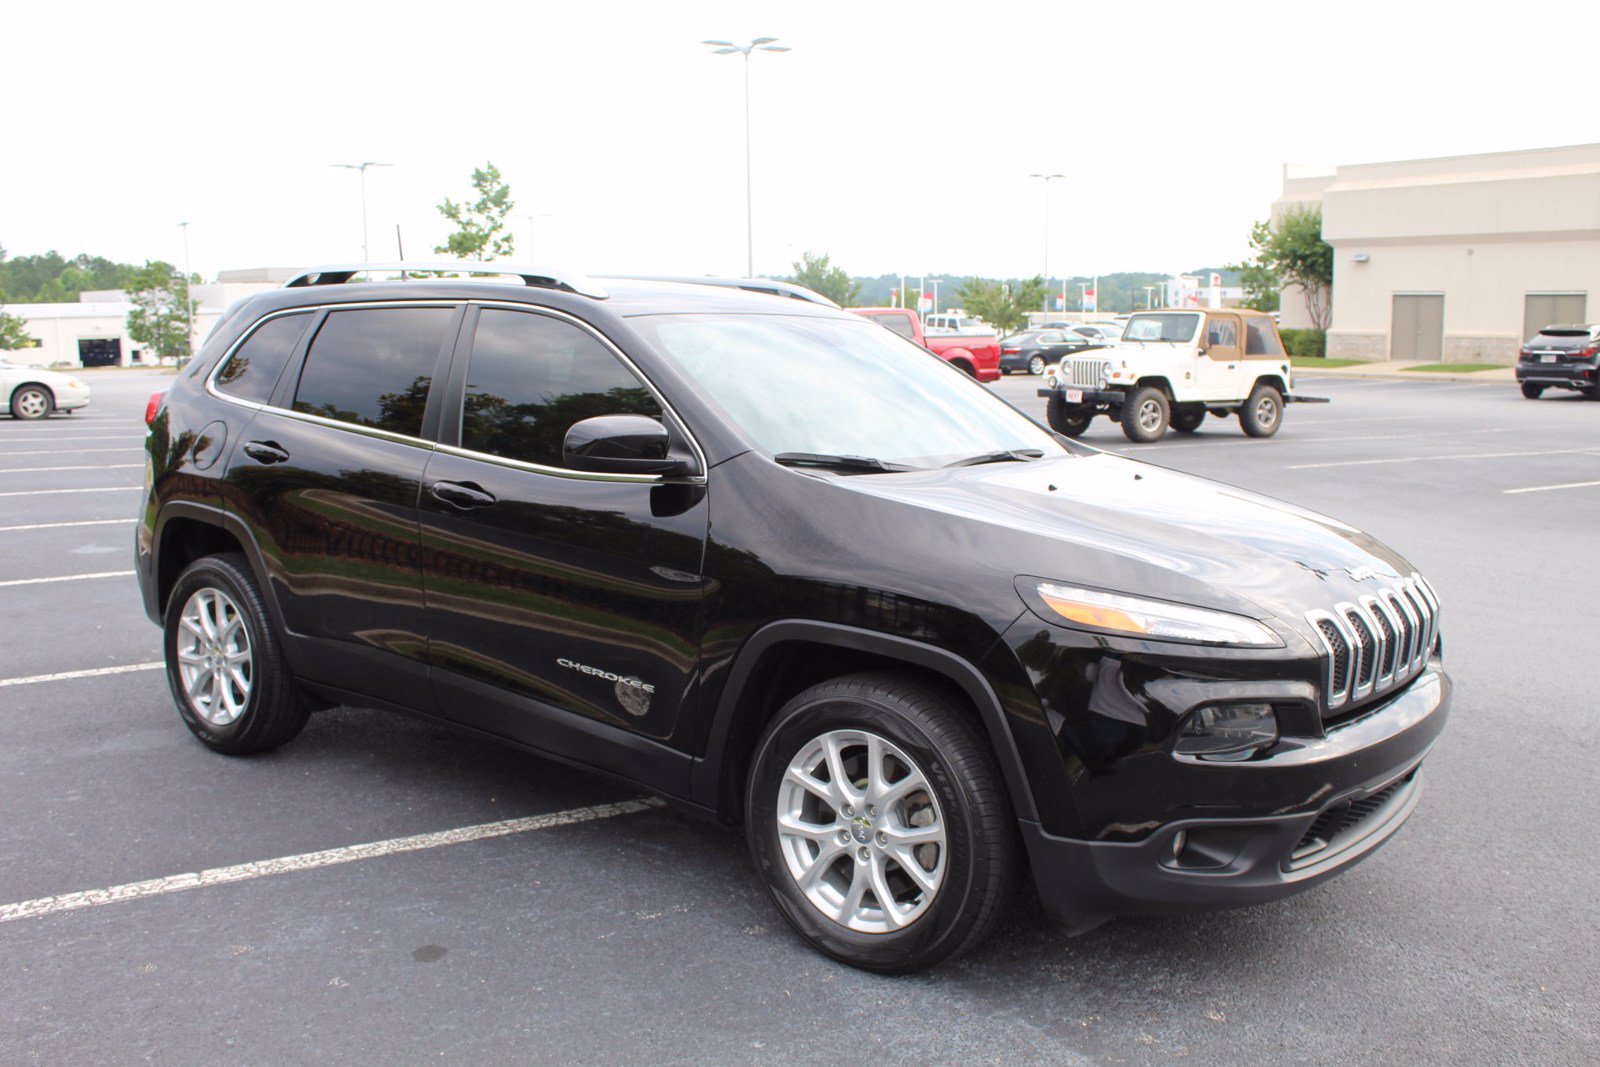 Pre-Owned 2018 Jeep Cherokee Latitude Plus Sport Utility in Macon #L8256A | Butler Auto Group Tire Size For 2018 Jeep Cherokee Latitude